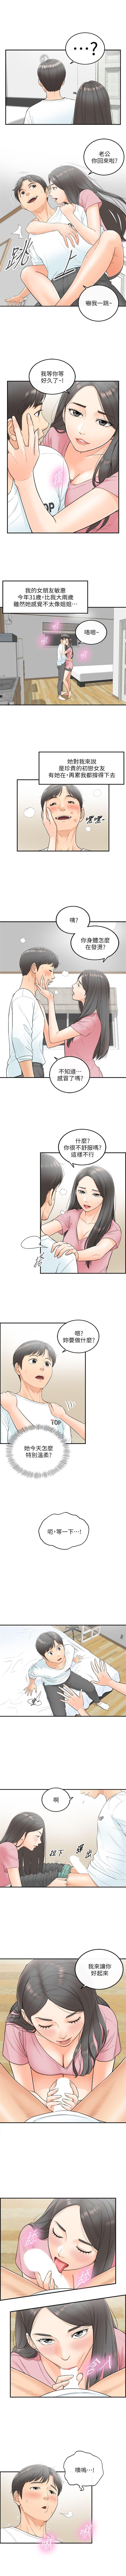 Real Sex 正妹小主管 1-48 官方中文（連載中） Lady - Page 5